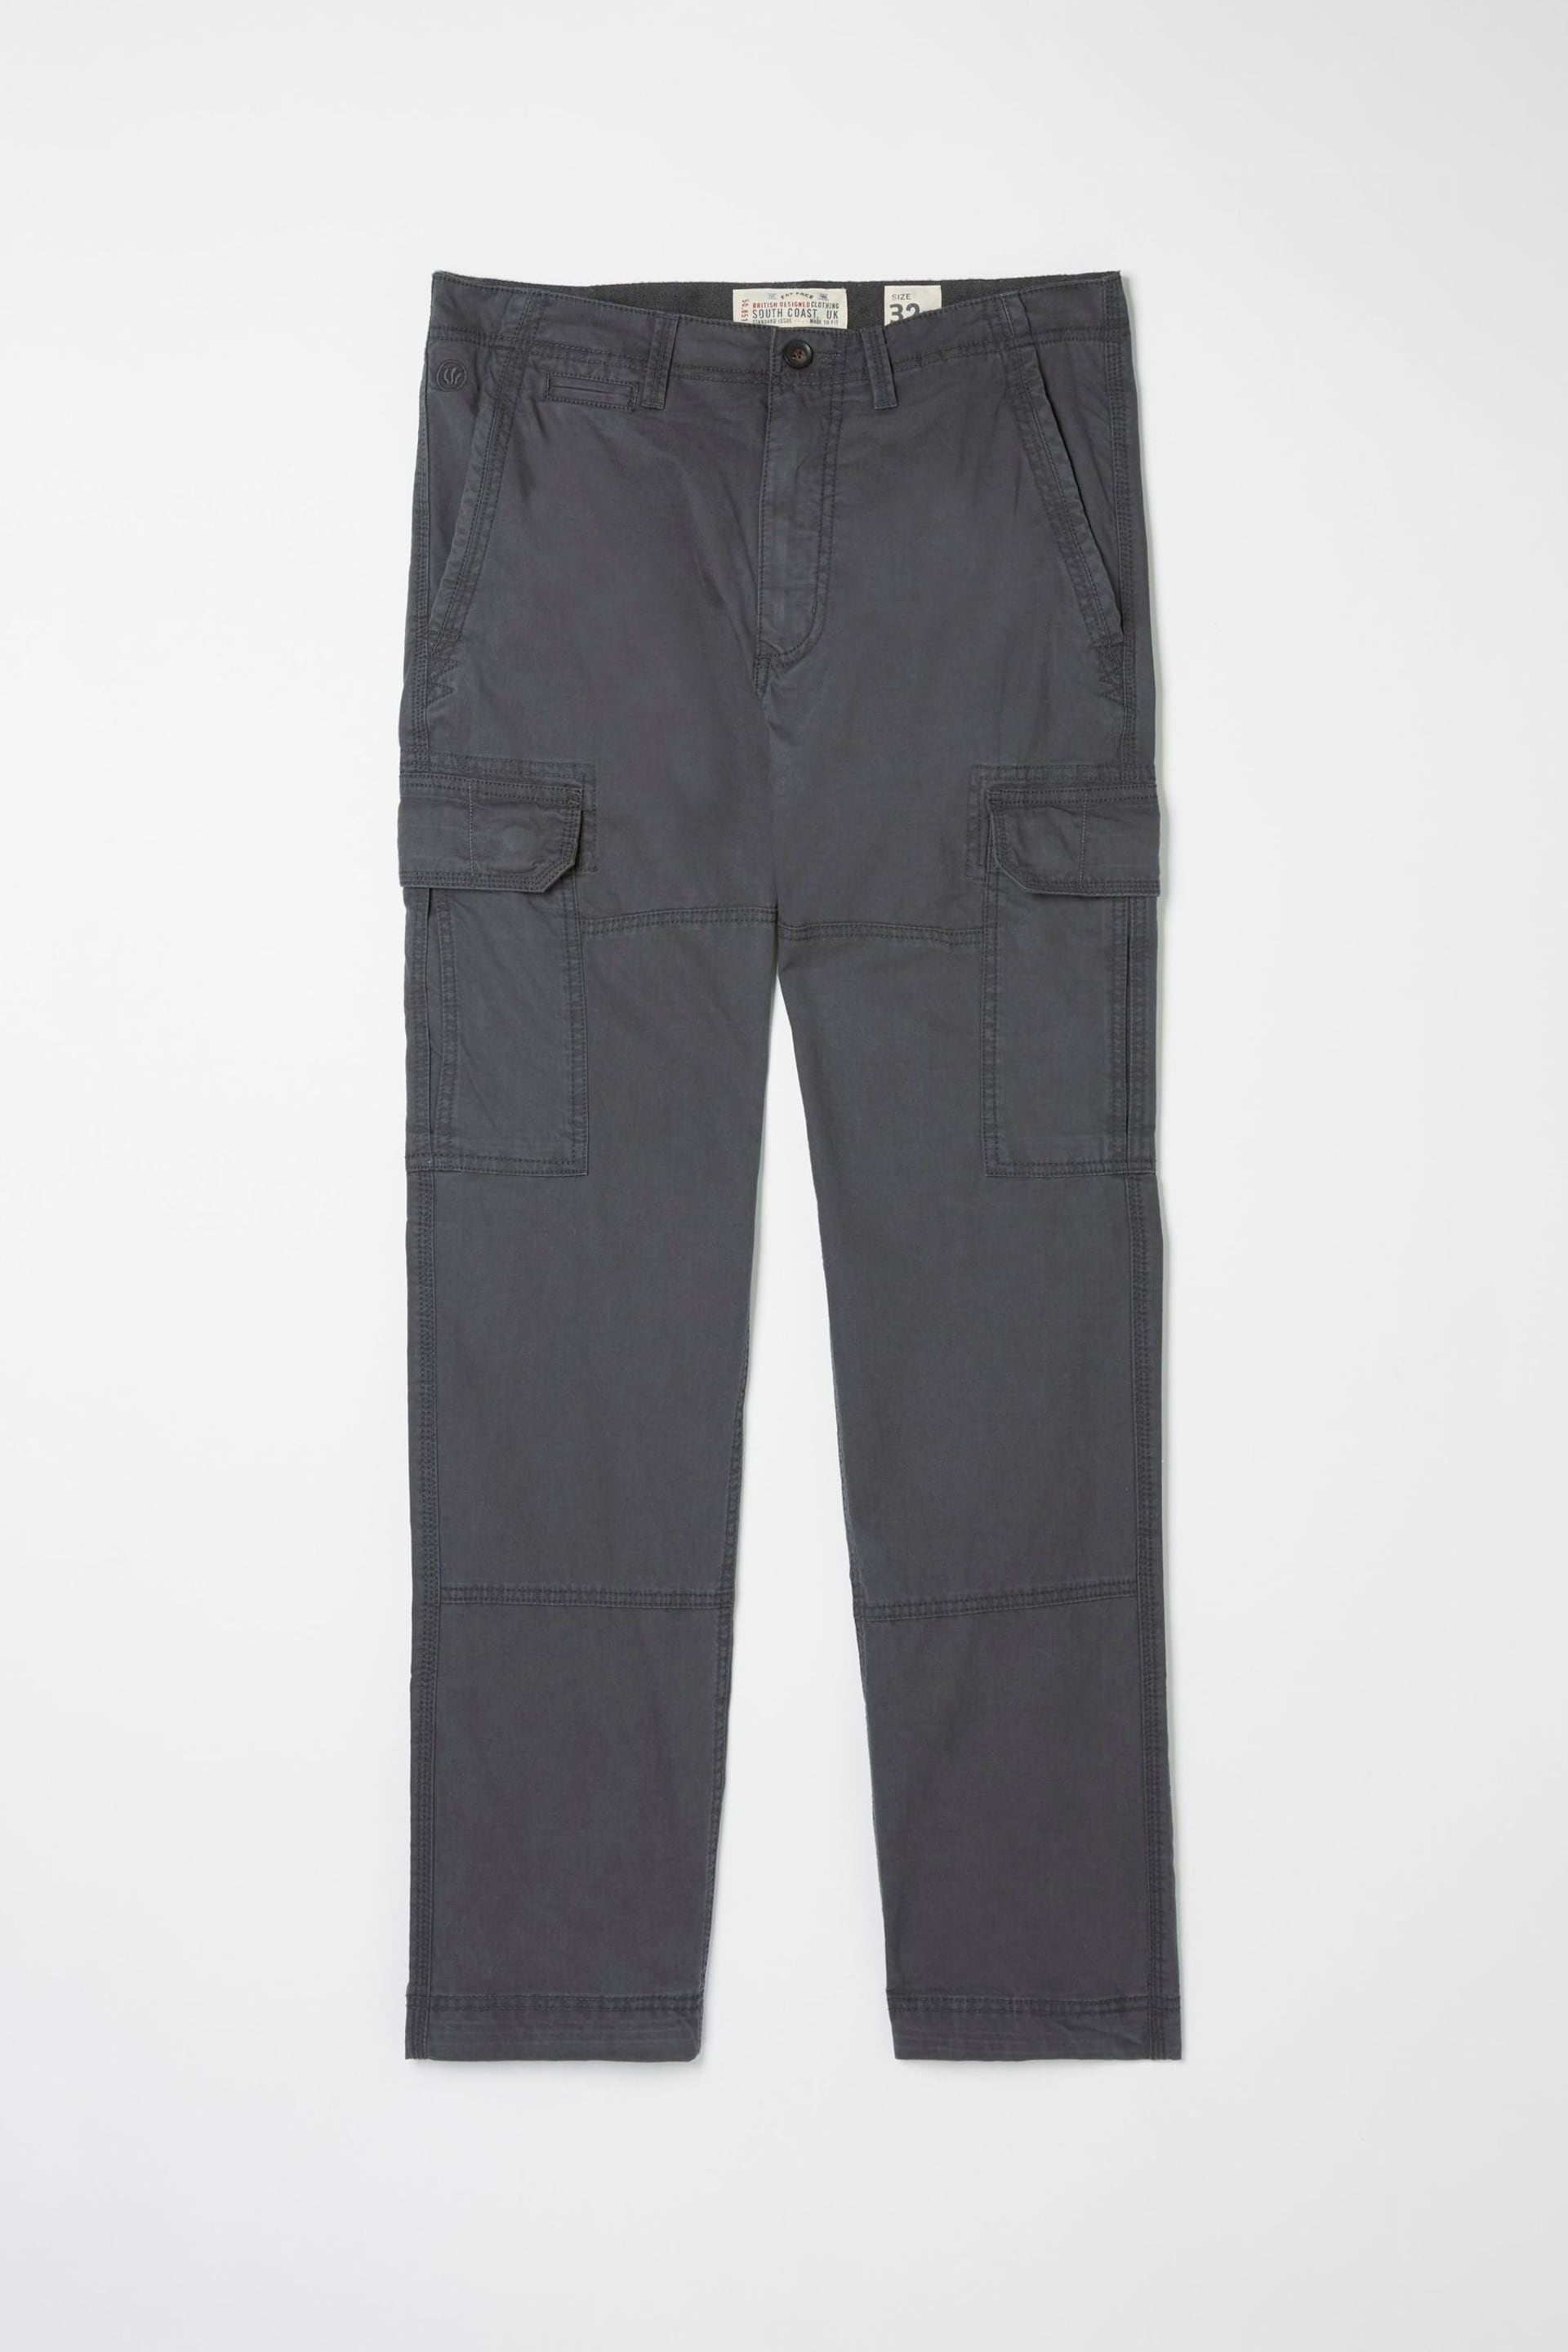 FatFace Grey Ripstop Cargo Trousers - Image 5 of 5